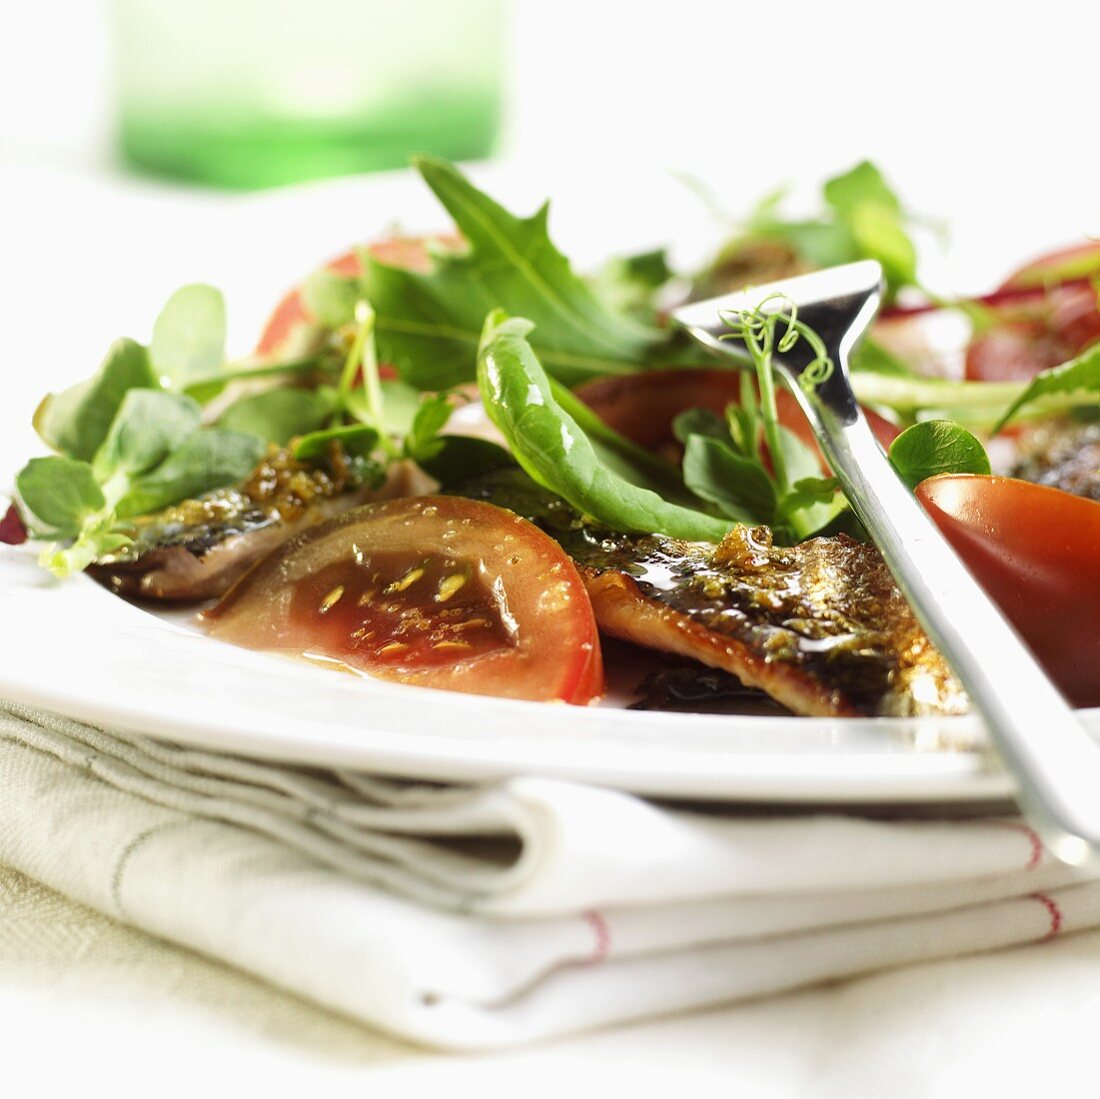 Salad leaves with anchovies, tomatoes and vinaigrette